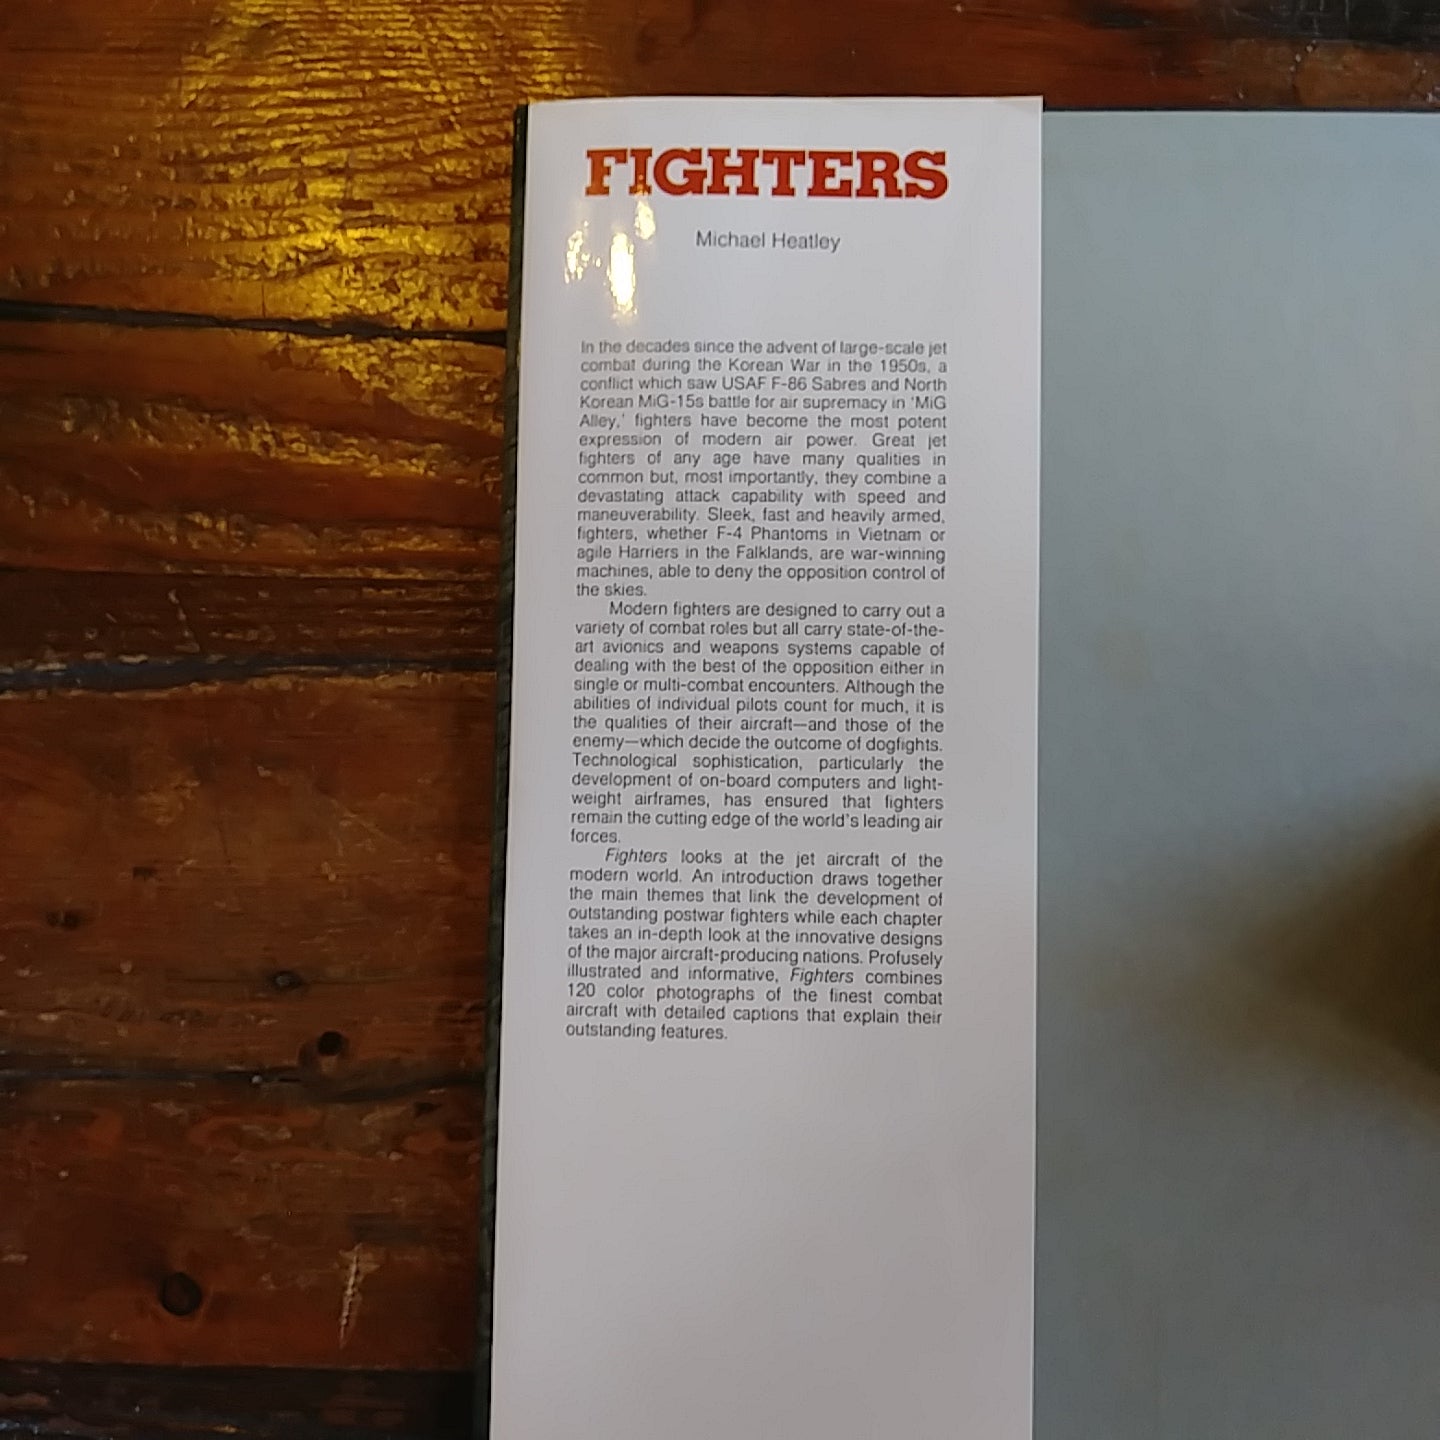 Book, "Fighters"